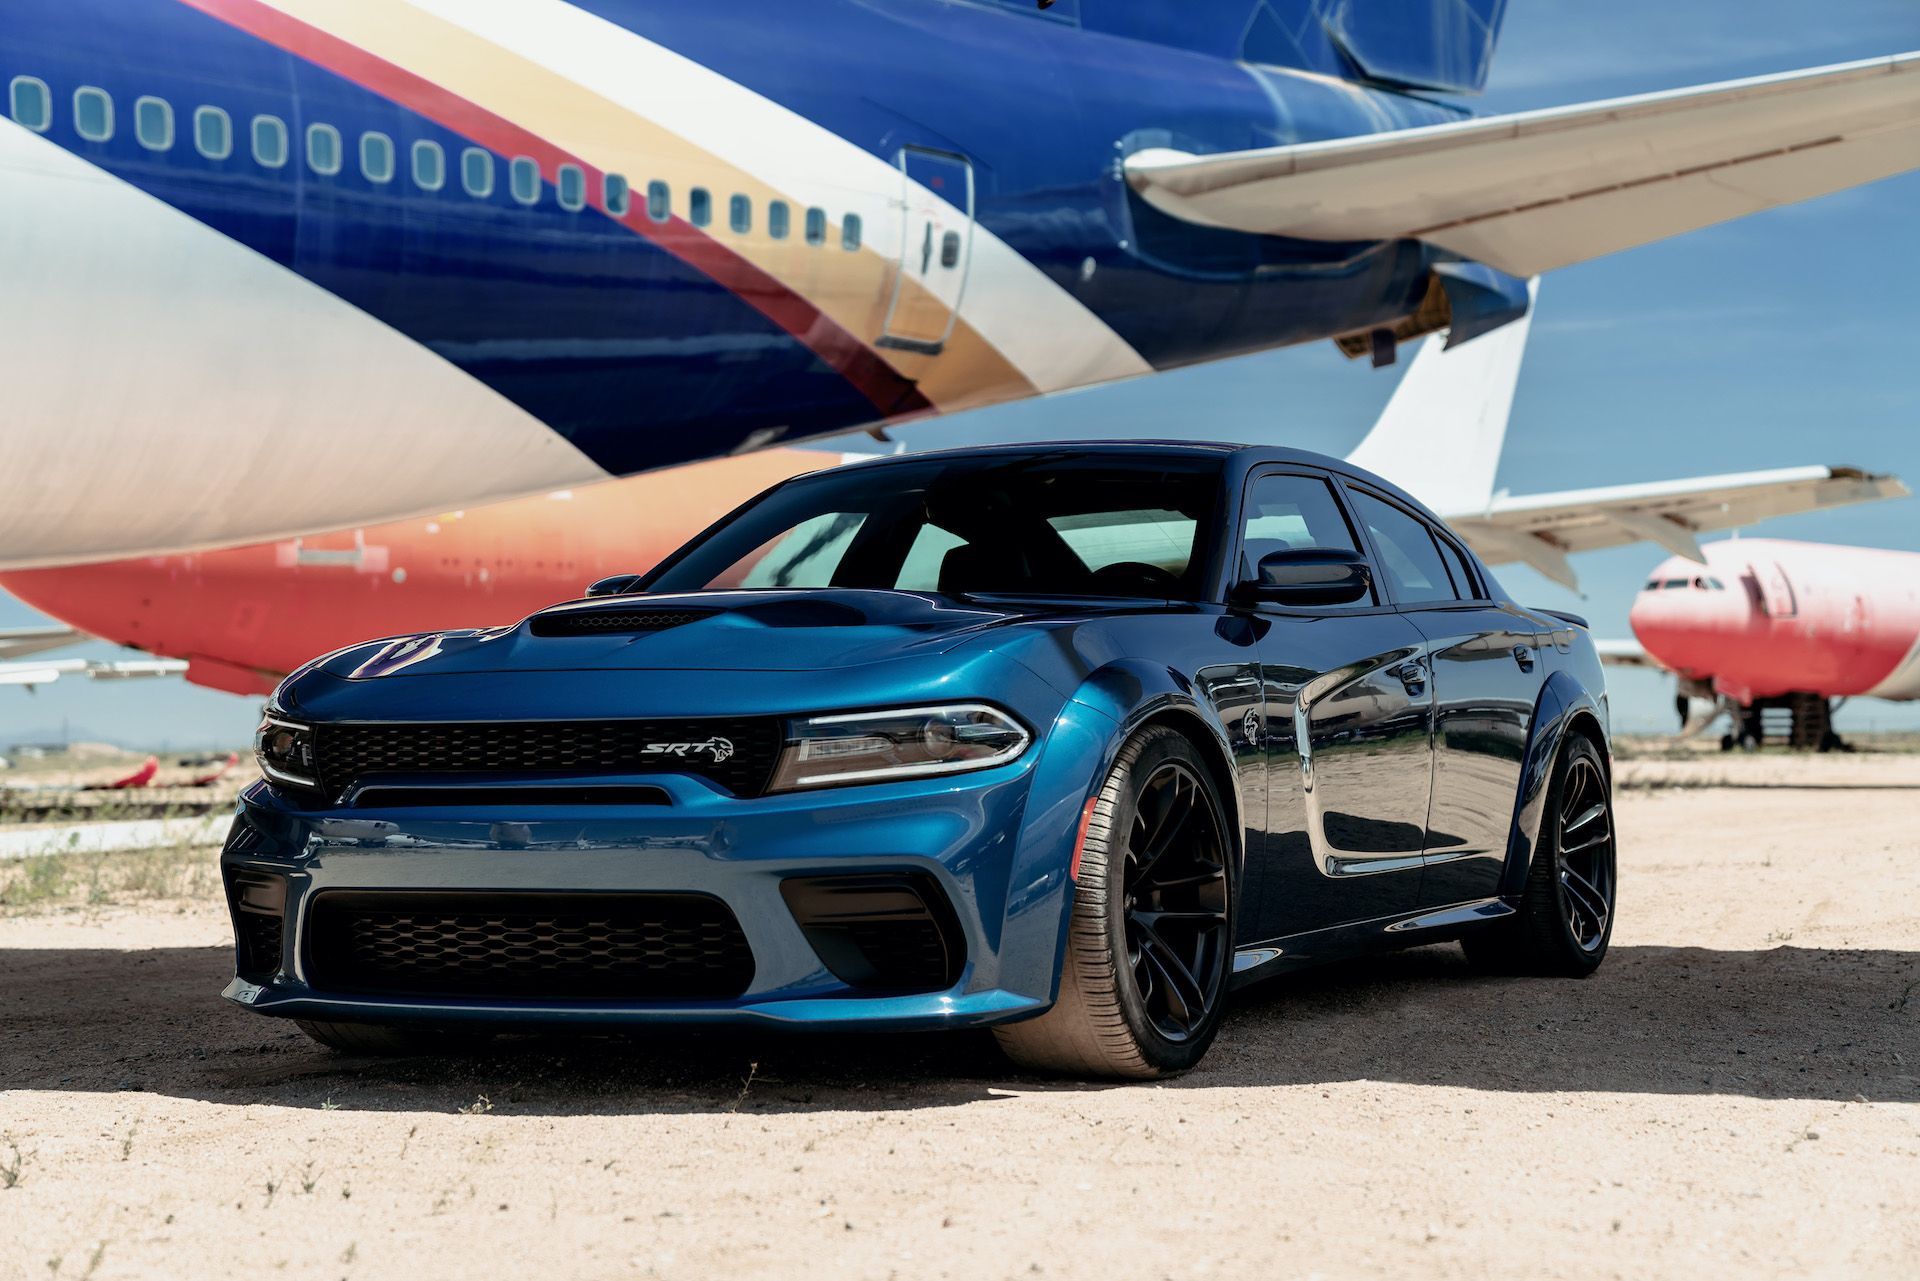 Blue 2020 Dodge Charger SRT Hellcat Widebody Parked Next to Airplane